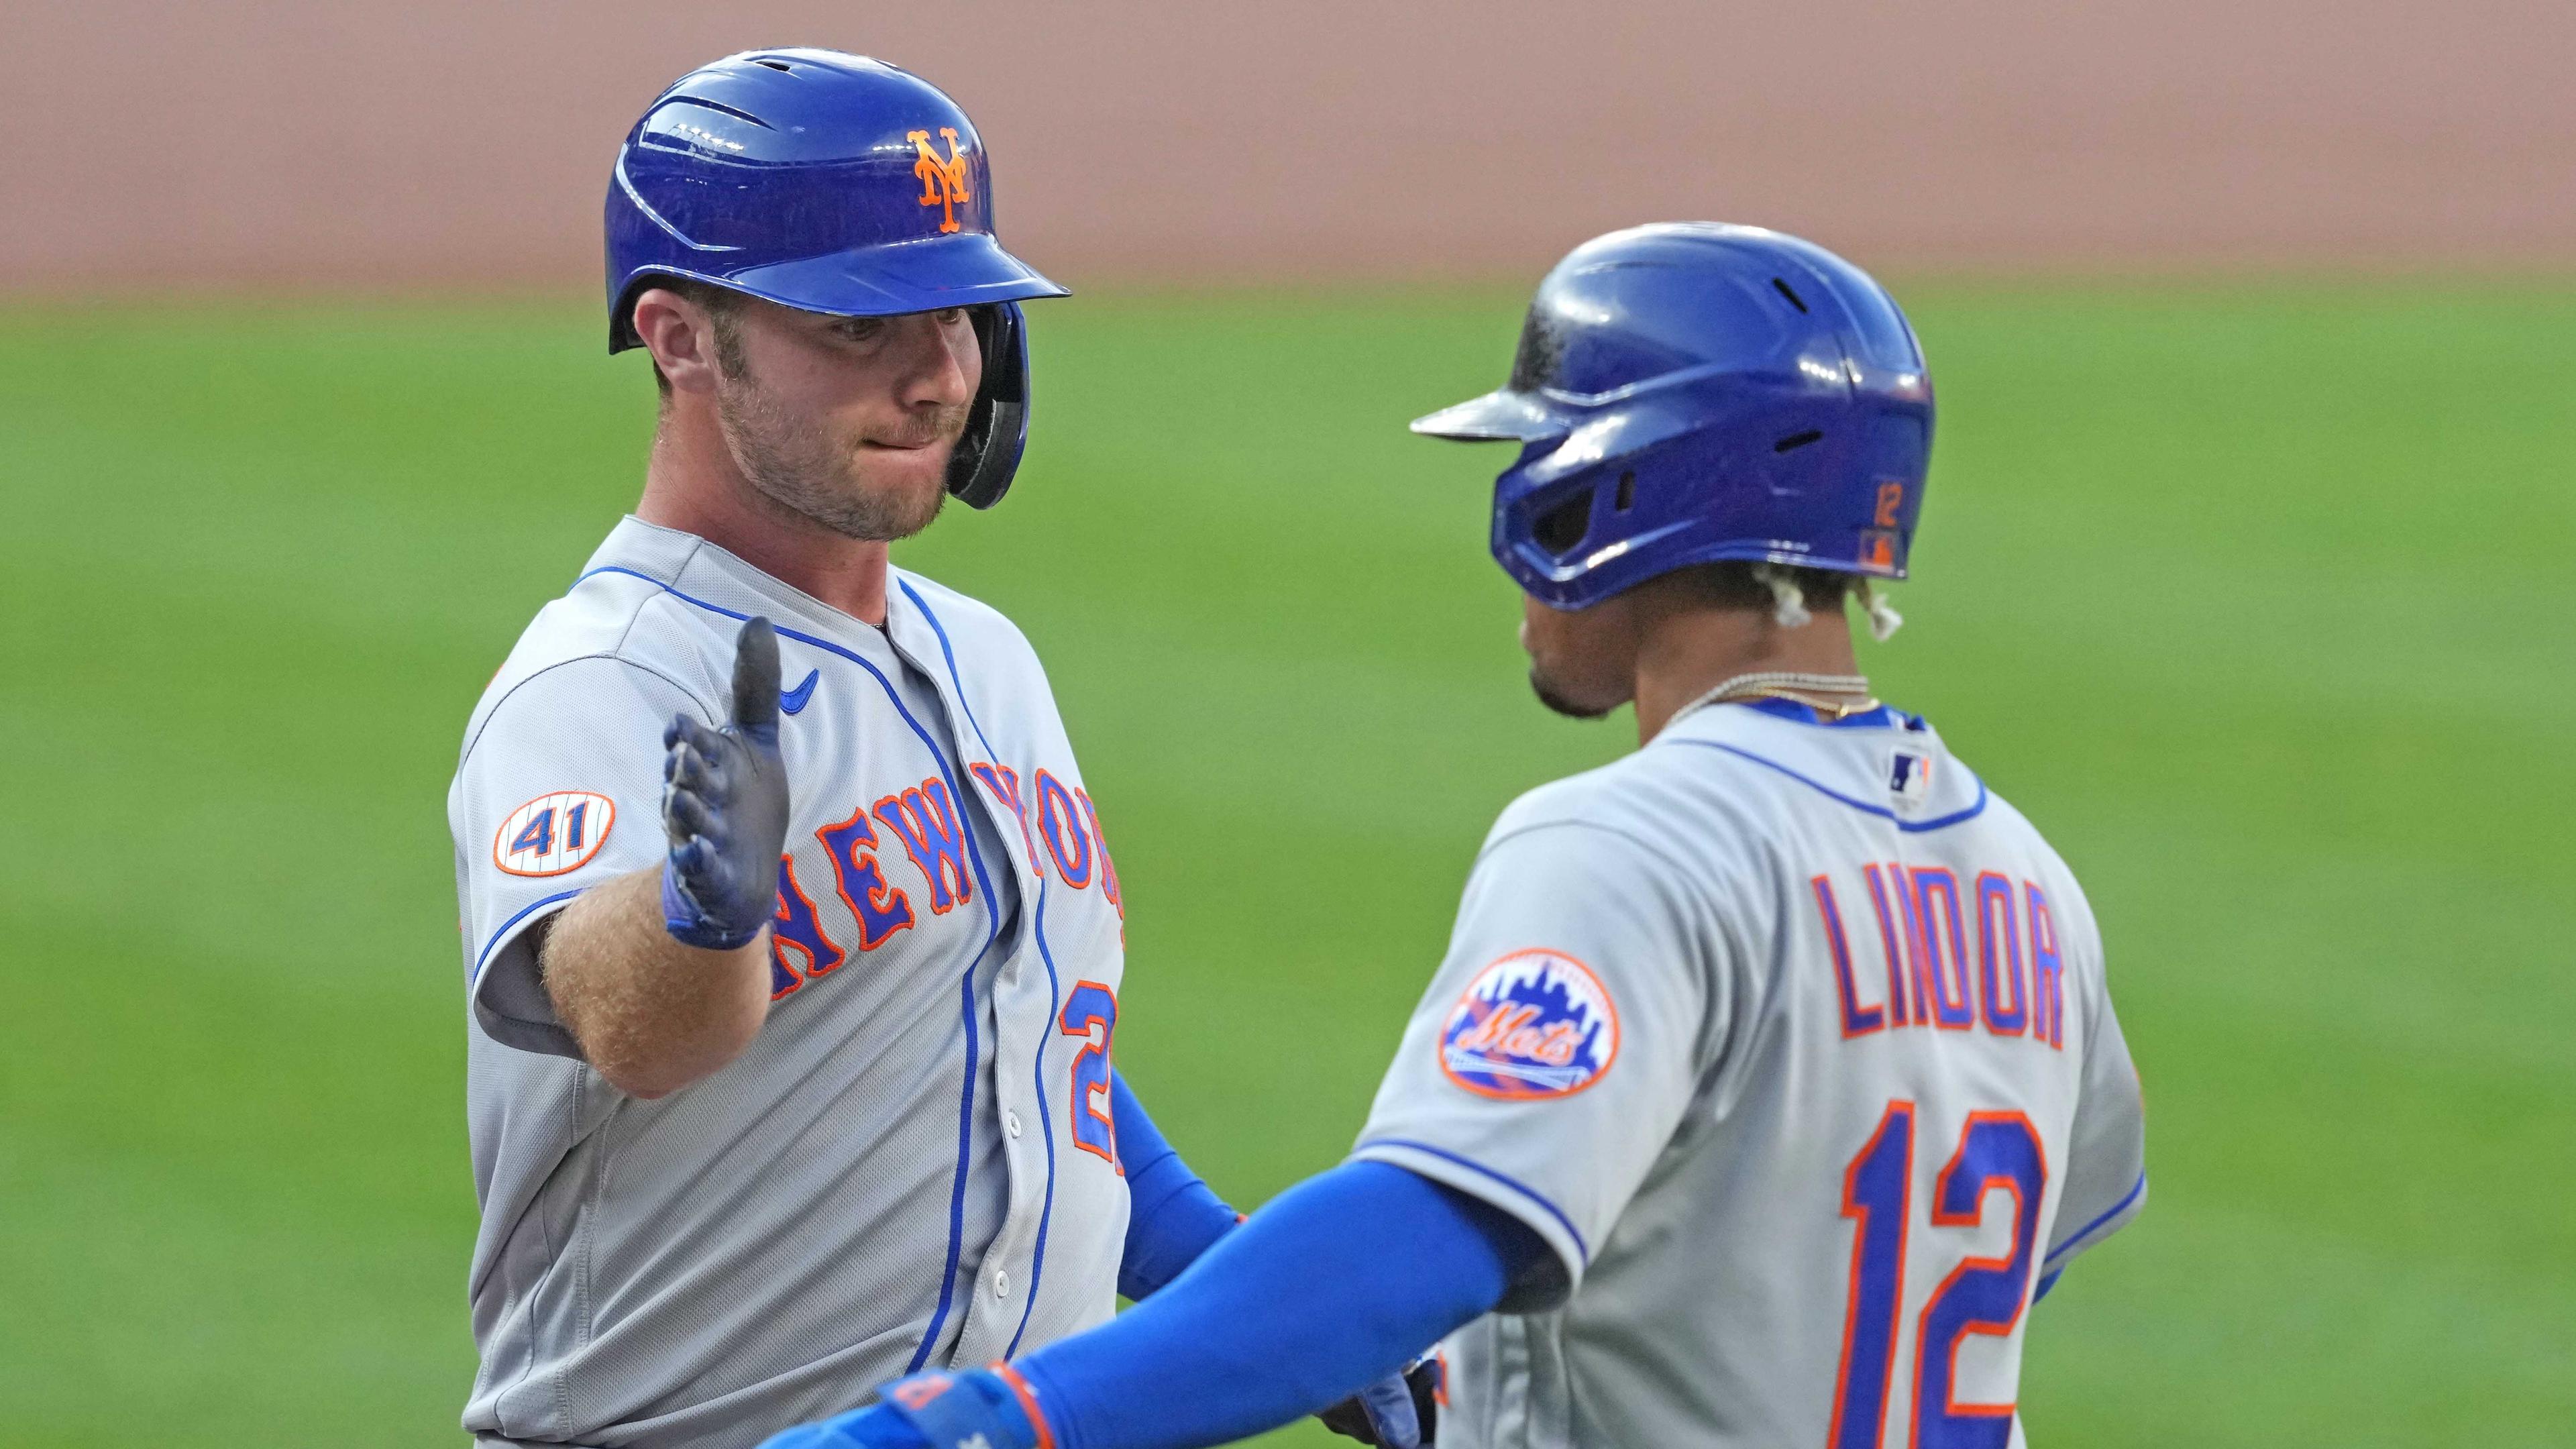 Jun 8, 2021; Baltimore, Maryland, USA; New York Mets designated hitter Pete Alonso (20) is greeted by shortstop Francisco Lindor (12) after a two-run home run in the first inning against the Baltimore Orioles at Oriole Park at Camden Yards. / Mitch Stringer-USA TODAY Sports